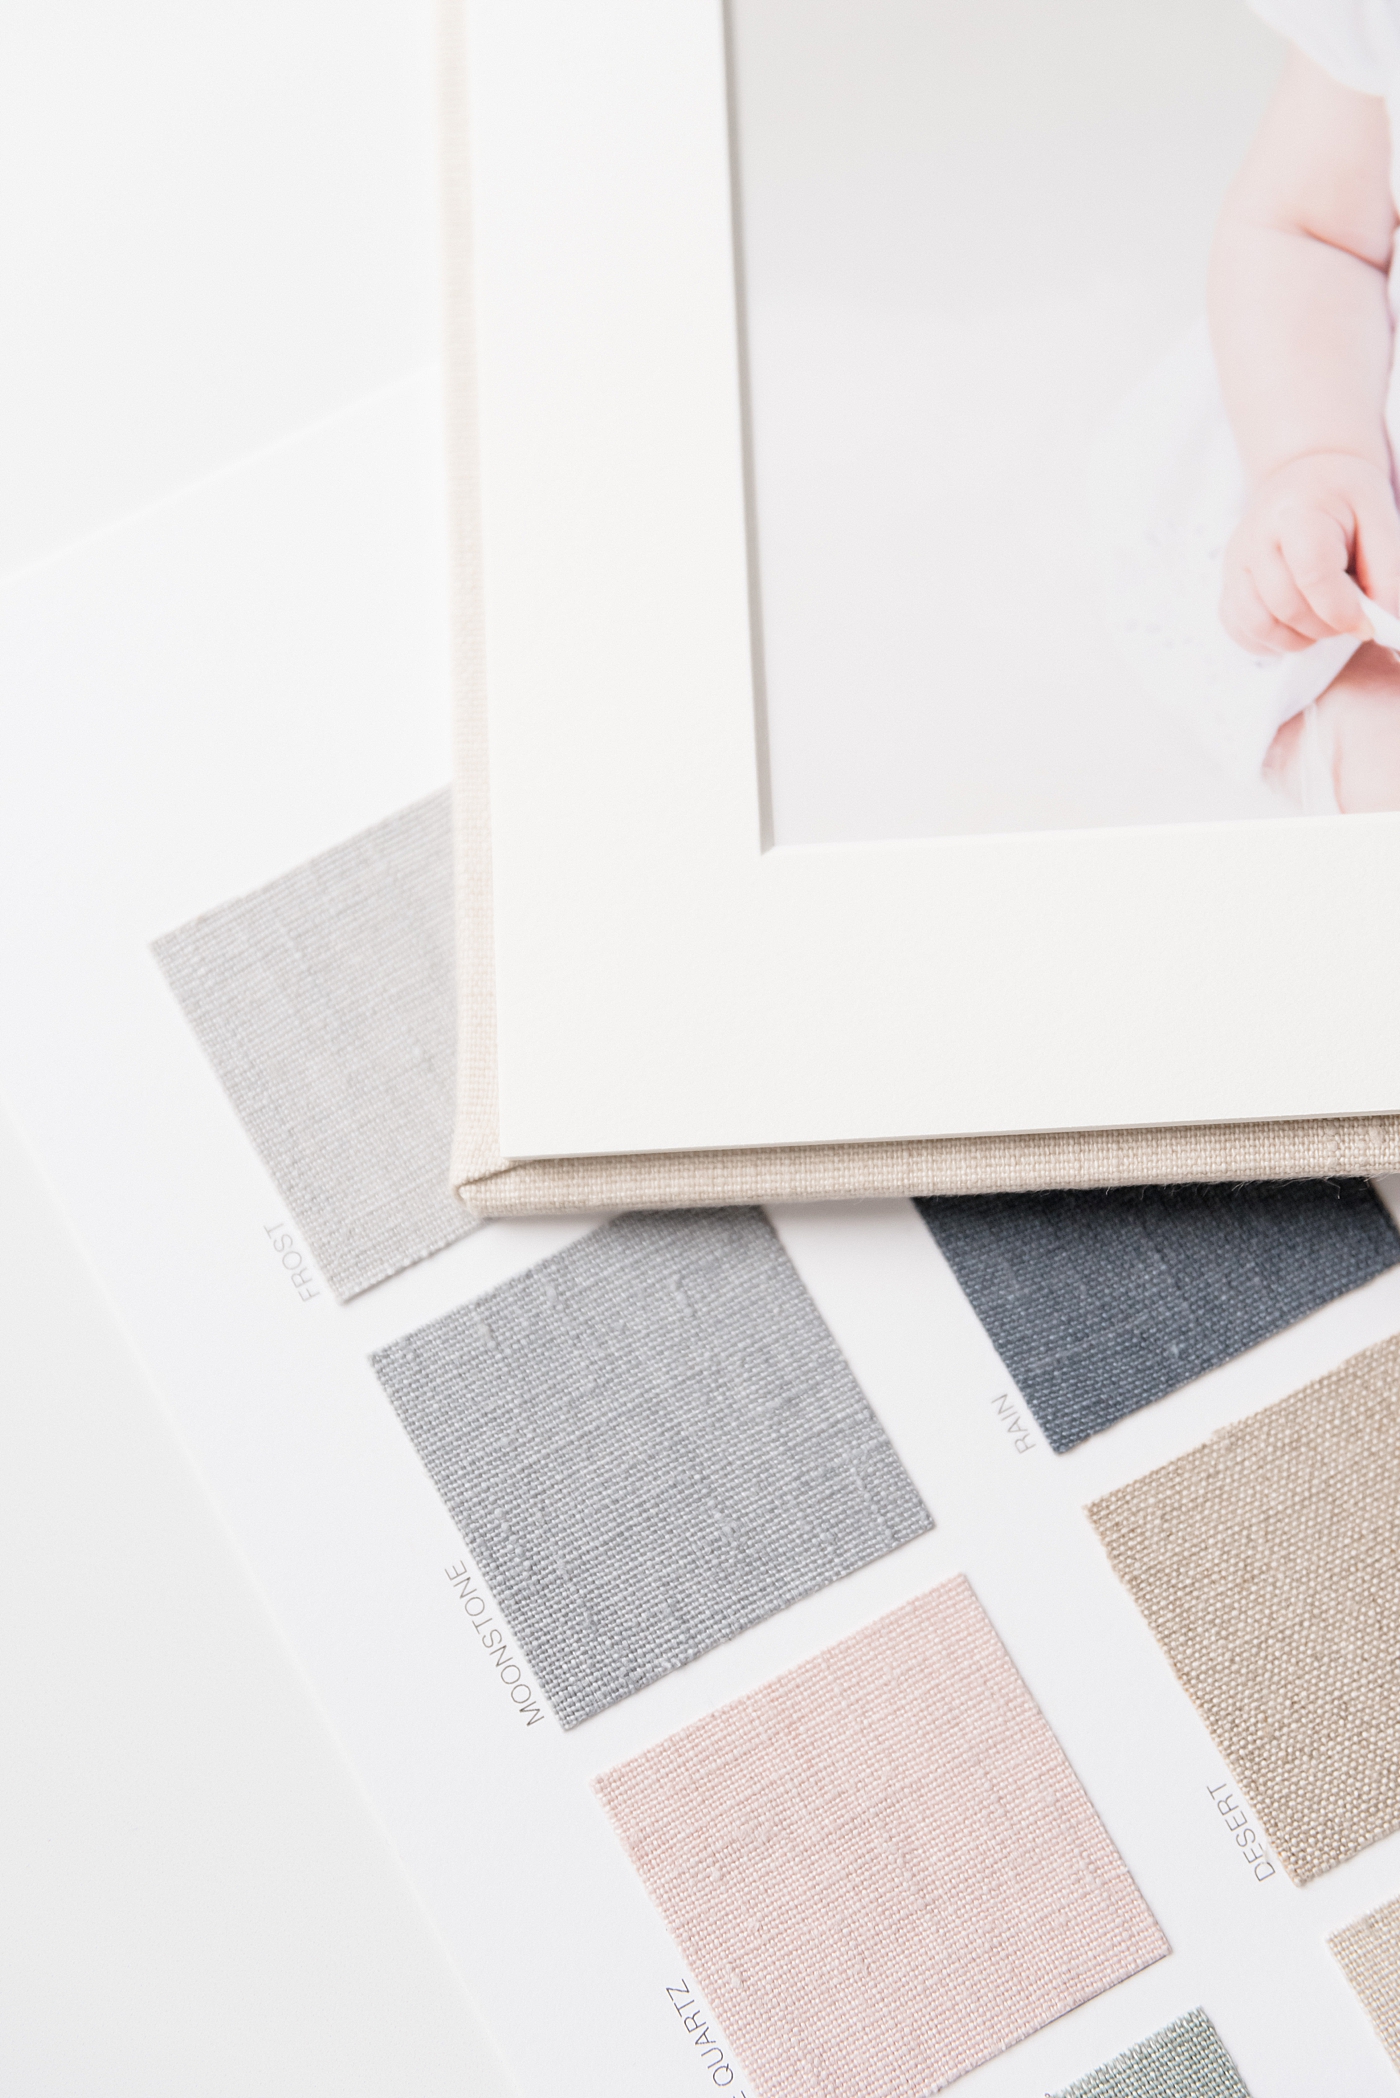 Detail of album pages with linen swatches | Photo by Anna Wisjo Photography